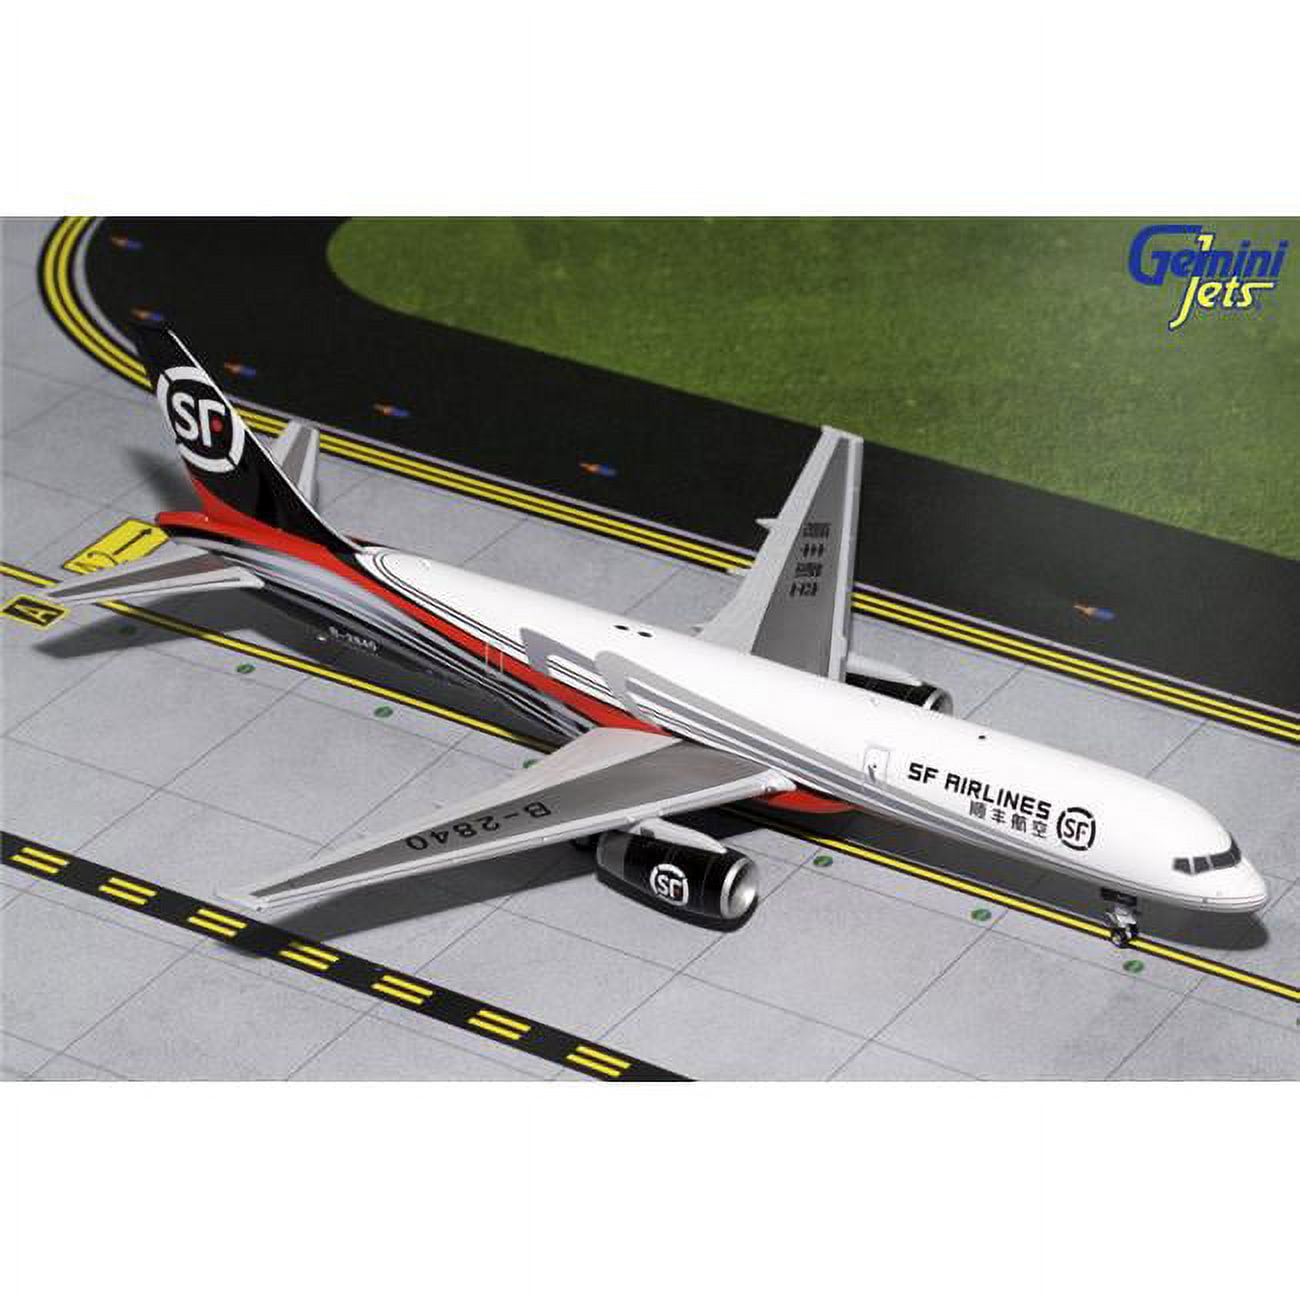 G2css657 Sf Airlines Boeing B757-200f 1-200 Diecast Model Airplane